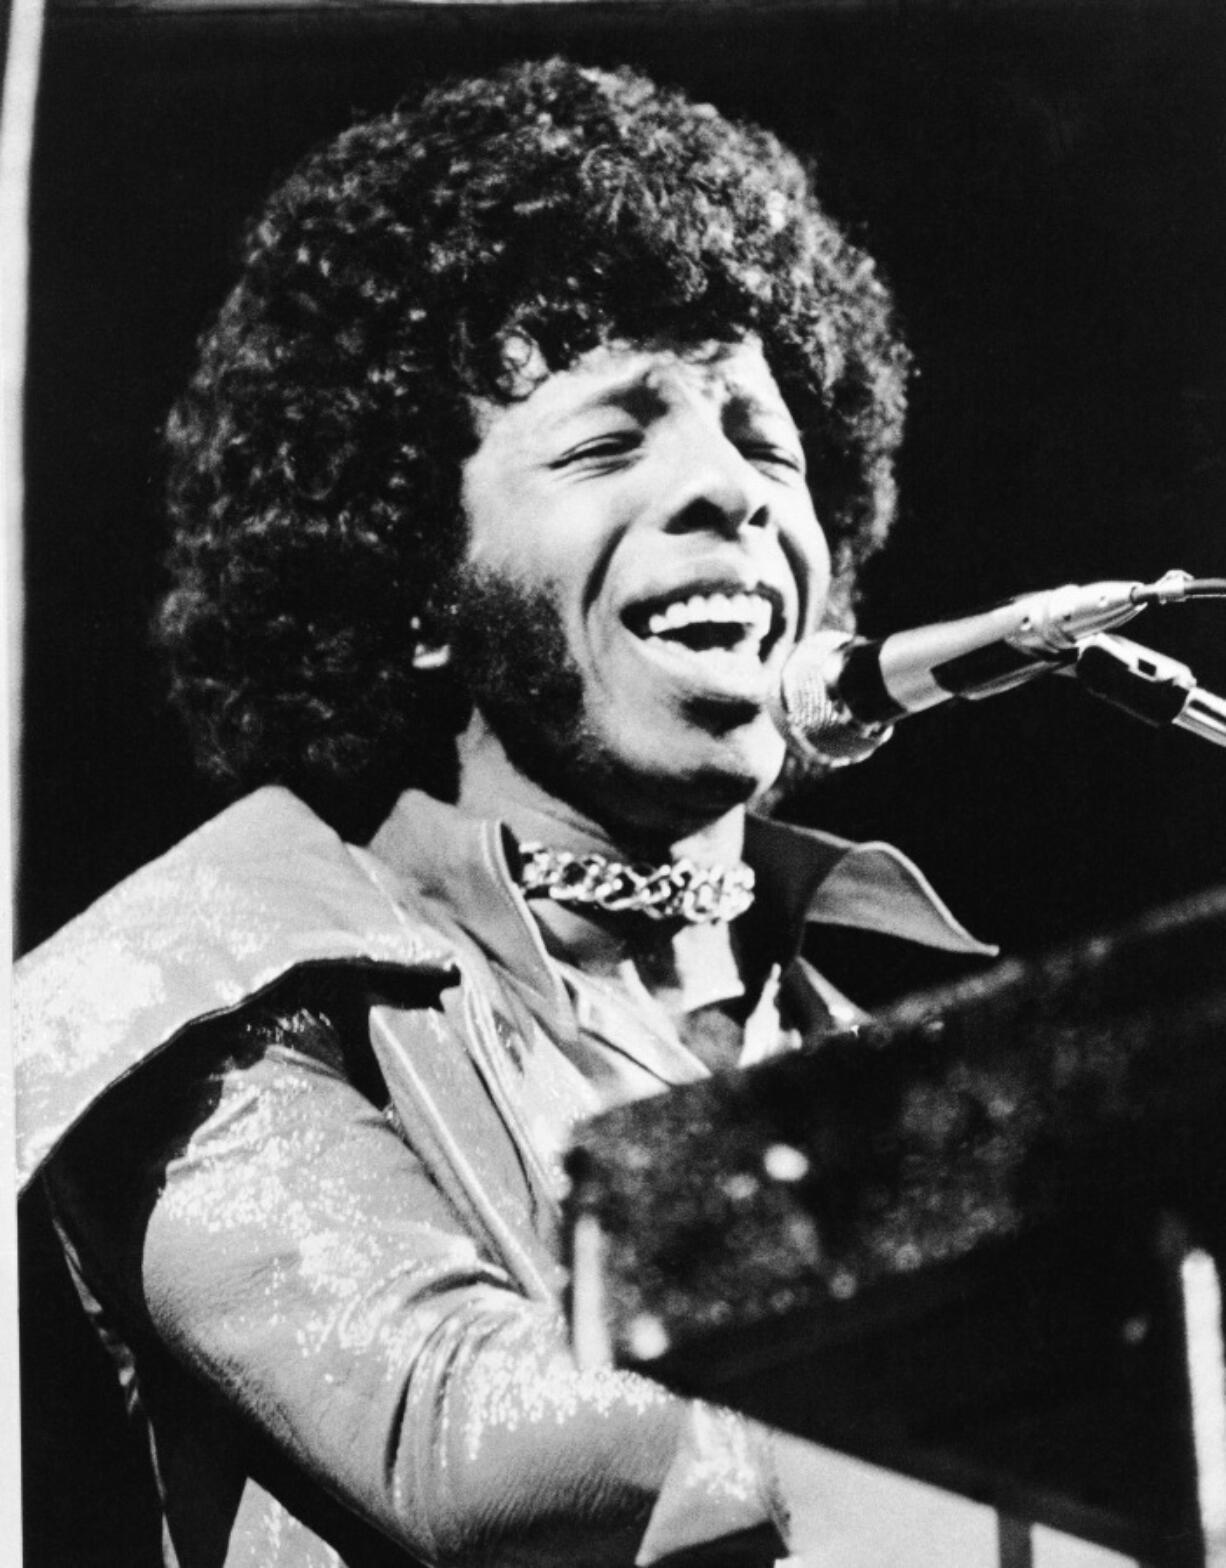 FILE - Rock star Sylvester "Sly" Stone of Sly and the Family Stone, April 1972. Questlove has his own book imprint and is launching it with a memoir by one of the world's most influential and enigmatic musicians, Sly Stone, leader of Sly and the Family Stone.